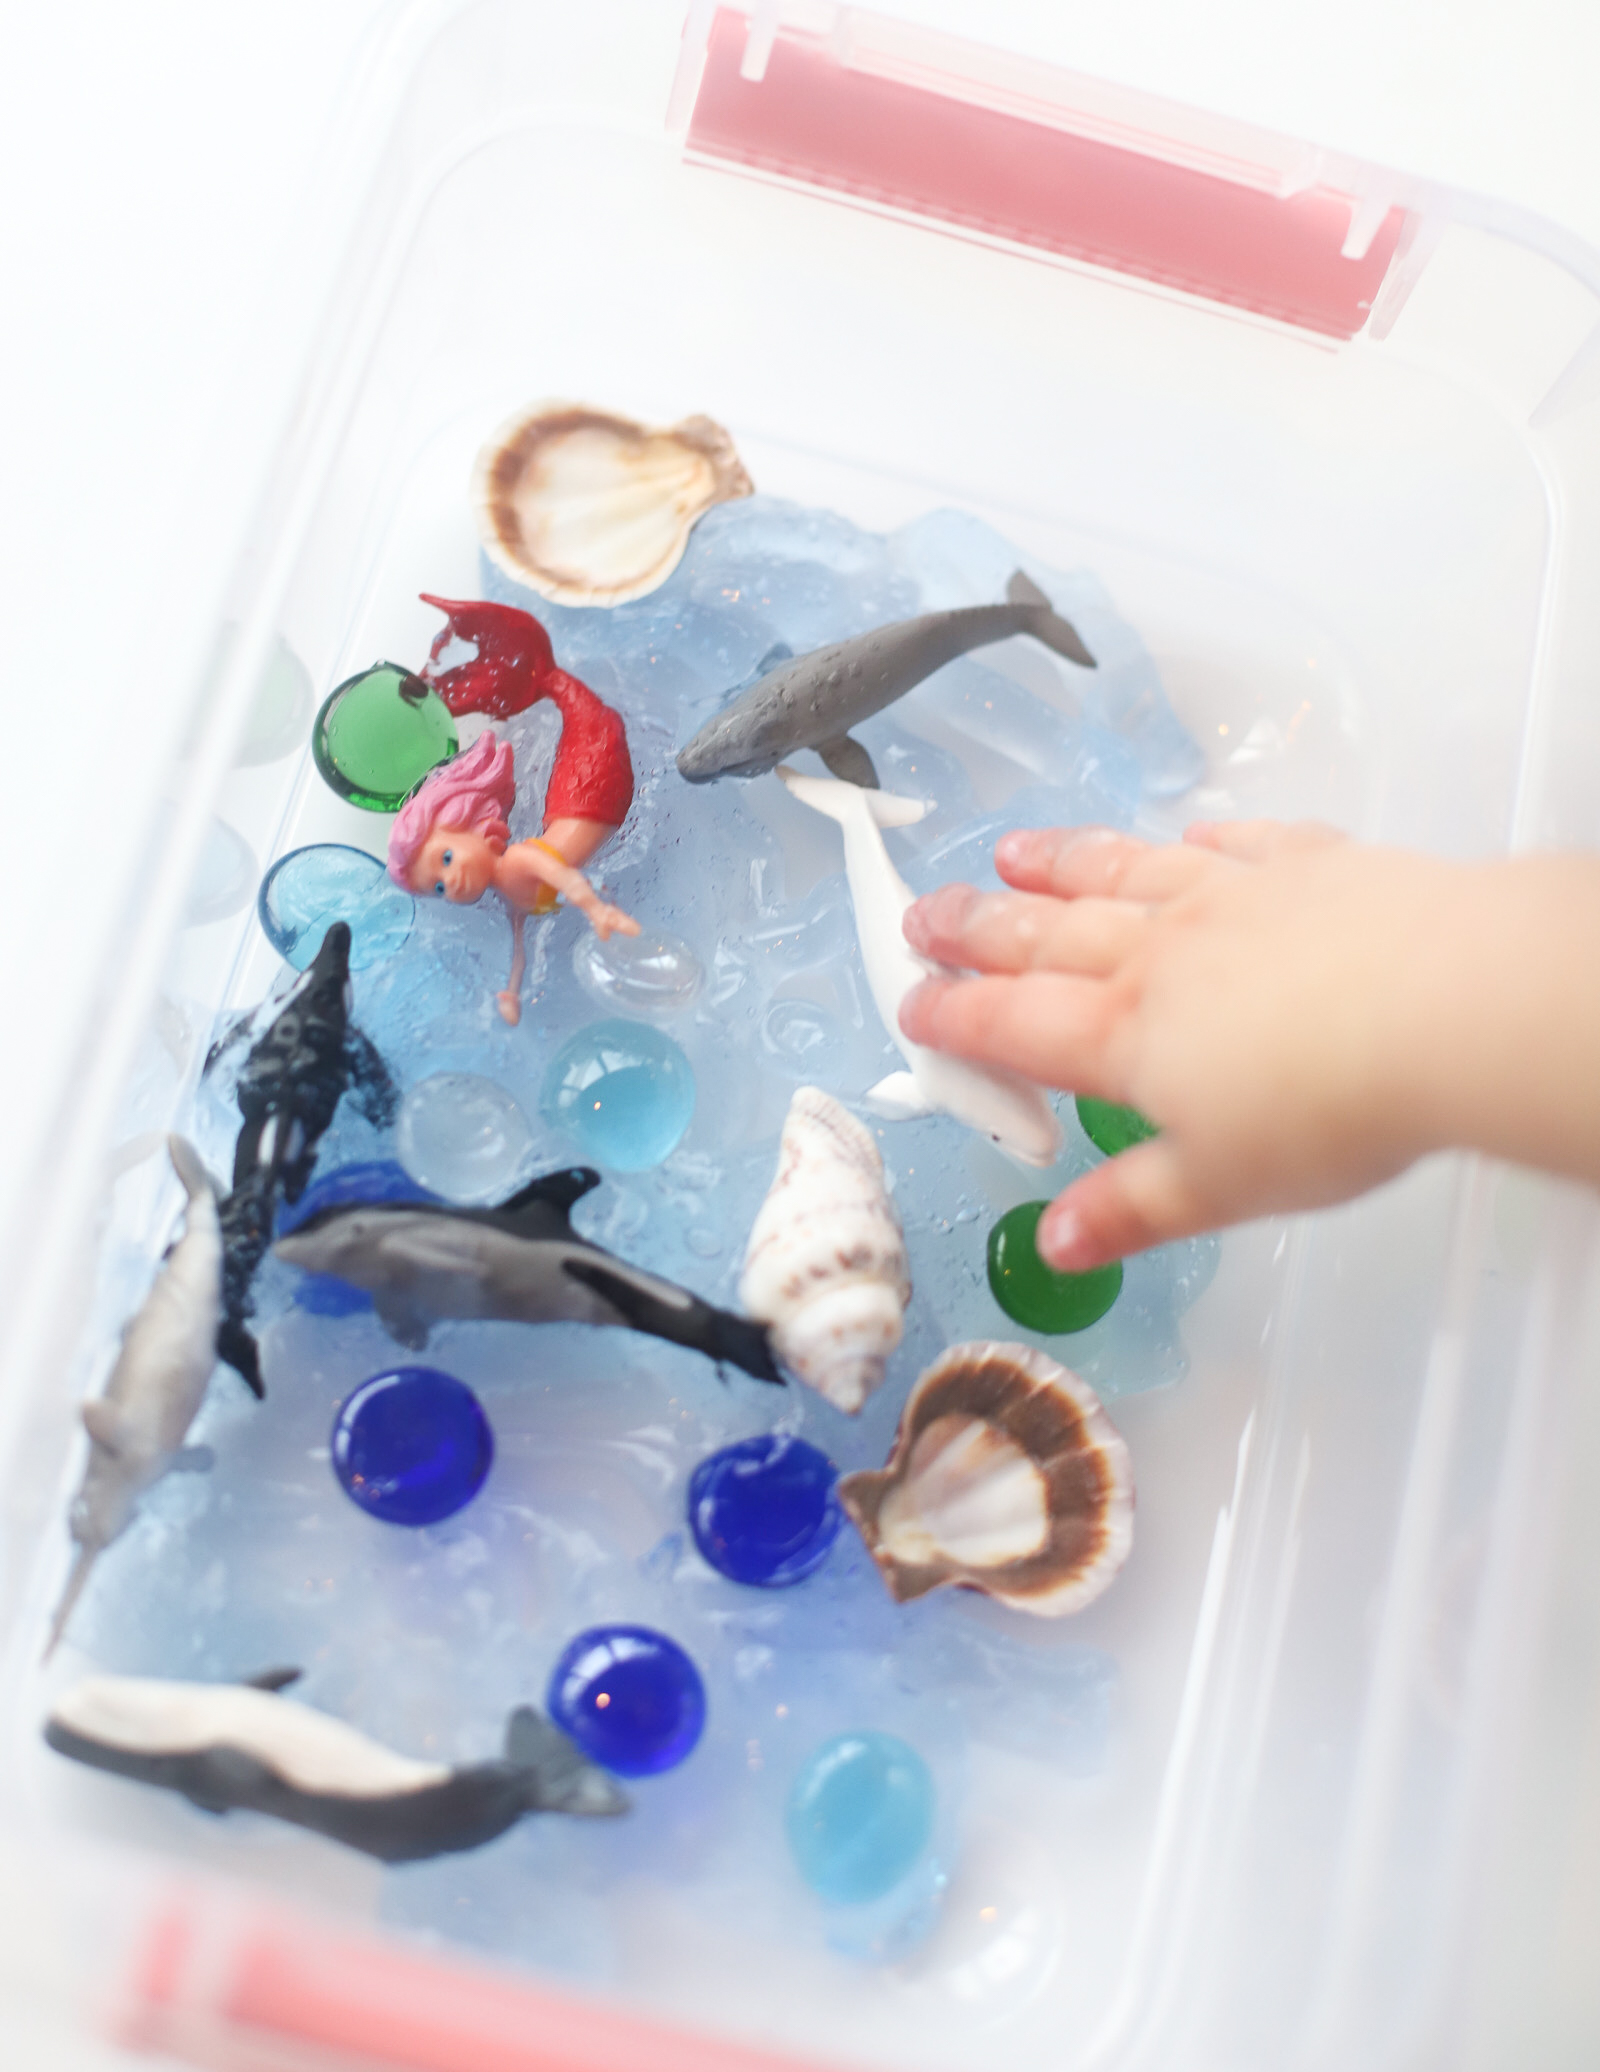 Make your kids an Easy and Fun Kids Ocean Sensory Bin Activity with inexpensive items and watch their imaginations run wild! Plus, a no mess option, and how to store and re-use the DIY ocean sensory bin again and again. This craft is a perfect learning activity for toddlers, preschools, kindergarteners, and beyond! | glitterinc.com | @glitterinc